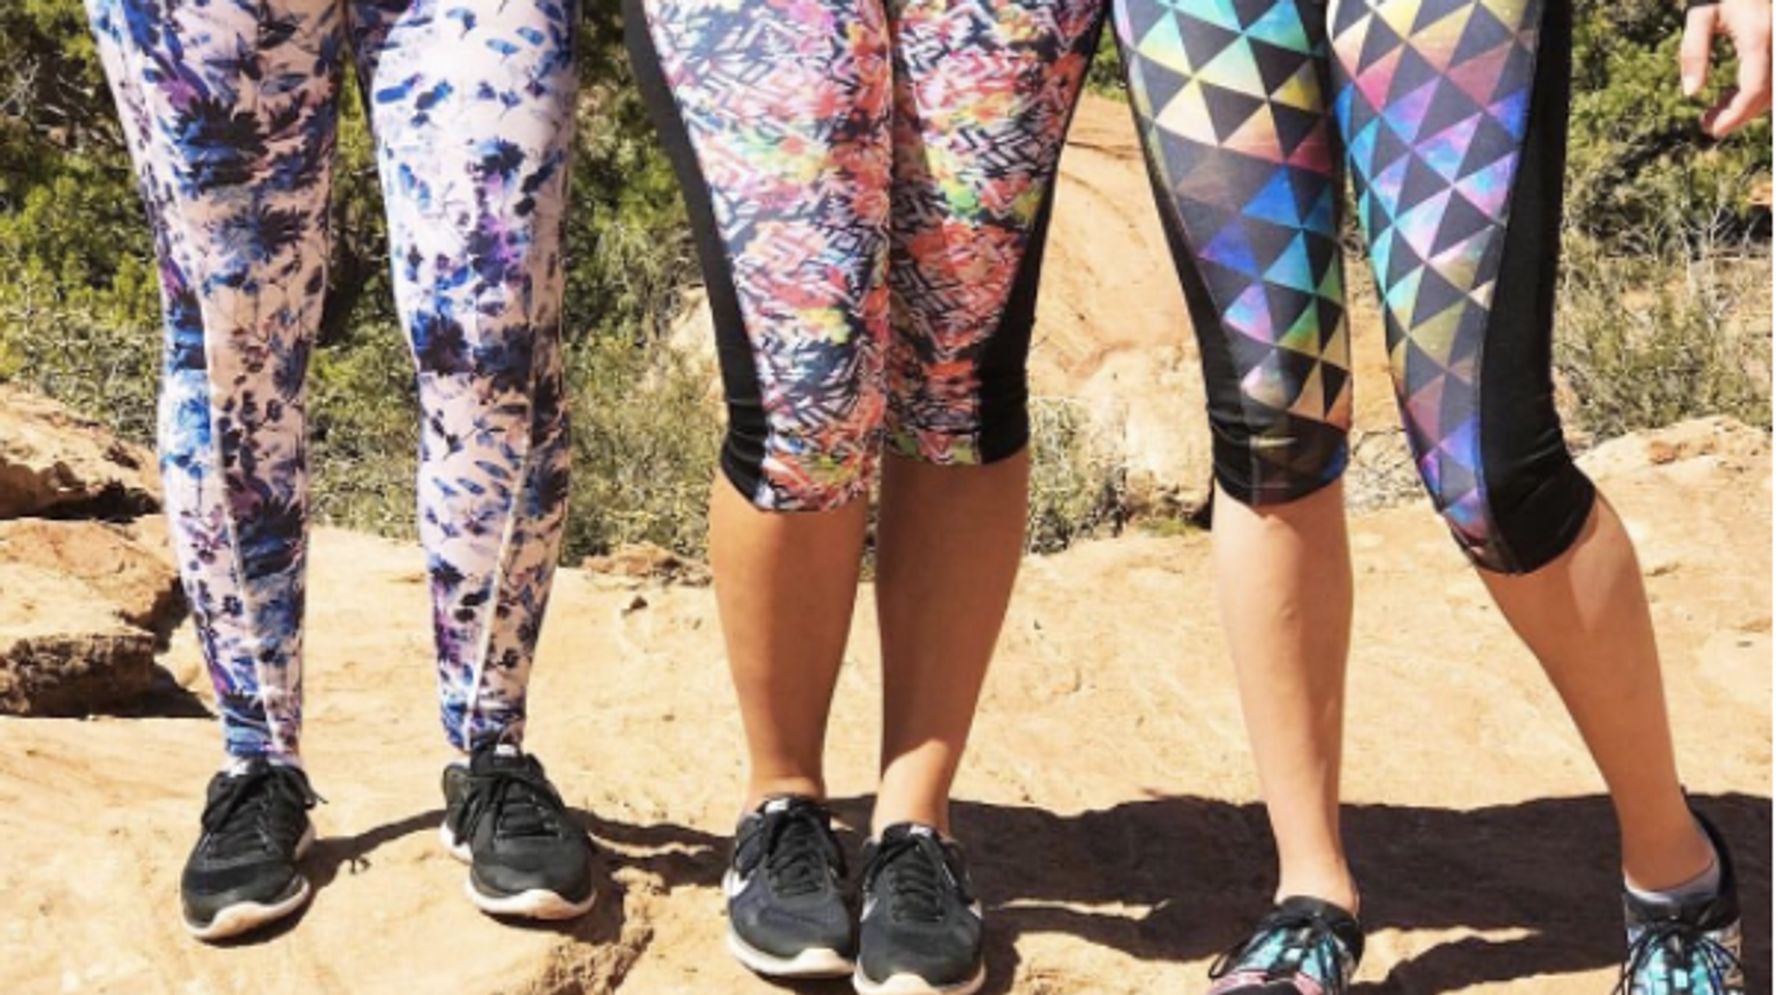 Lularoe's Leggings 'Rip Like Wet Toilet Paper,' And Now They're Paying For  It